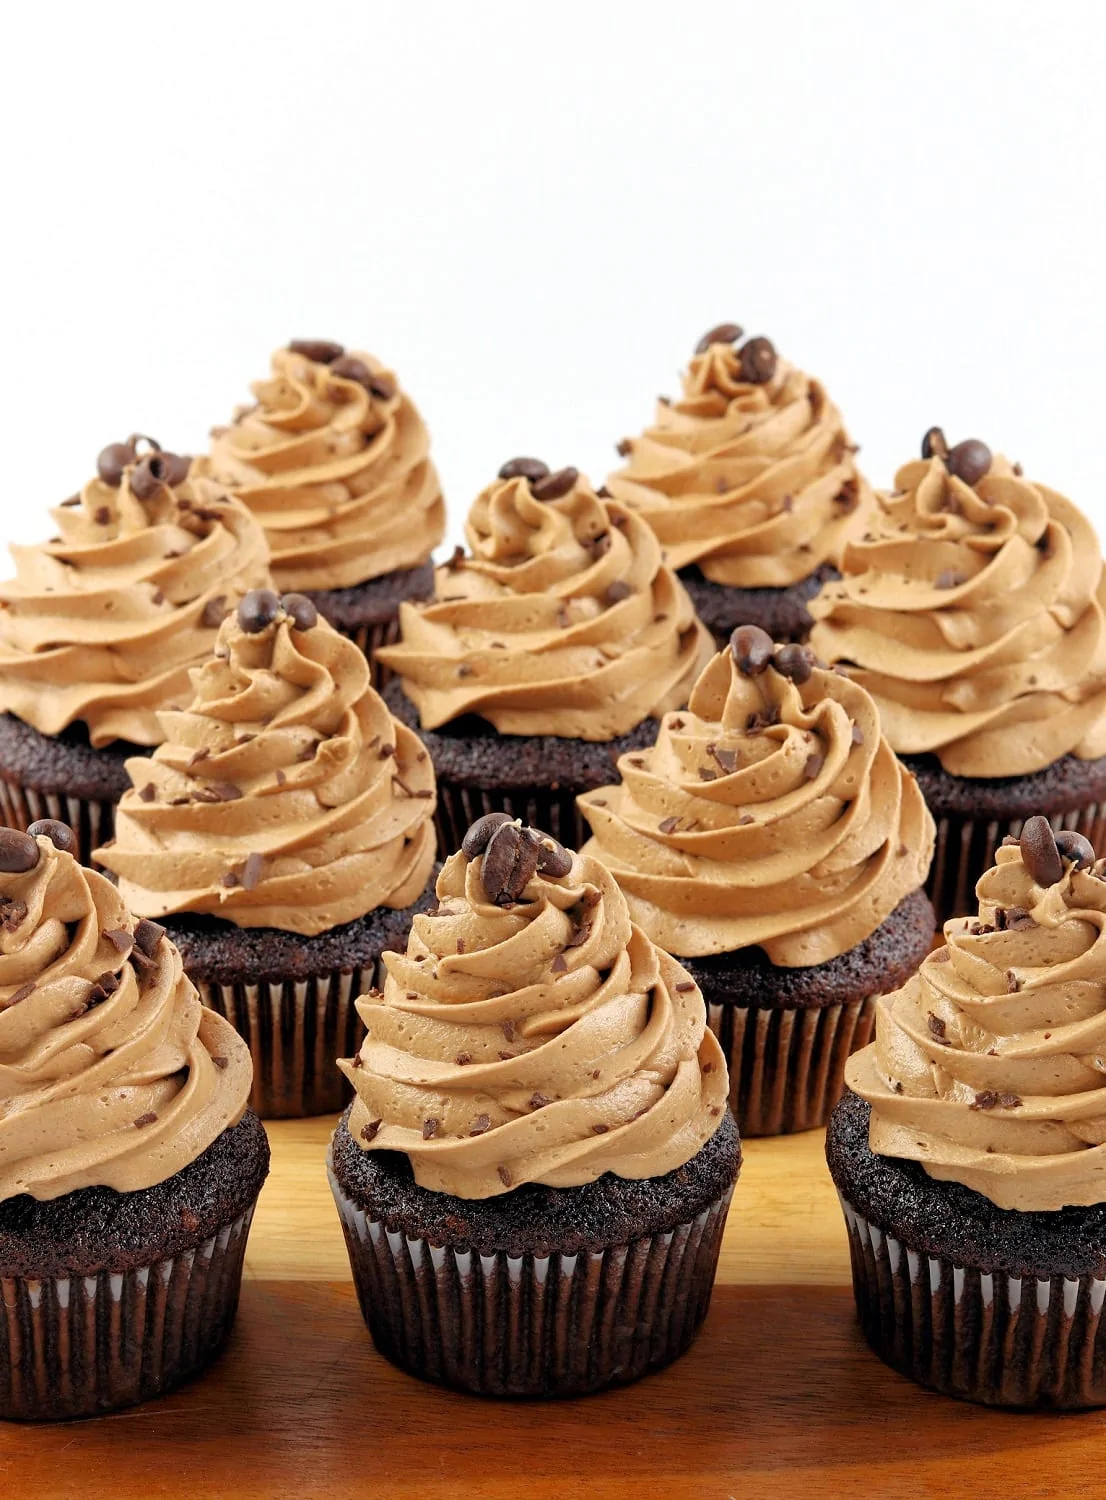 Chocolate and Espresso Cupcakes with Mocha Buttercream